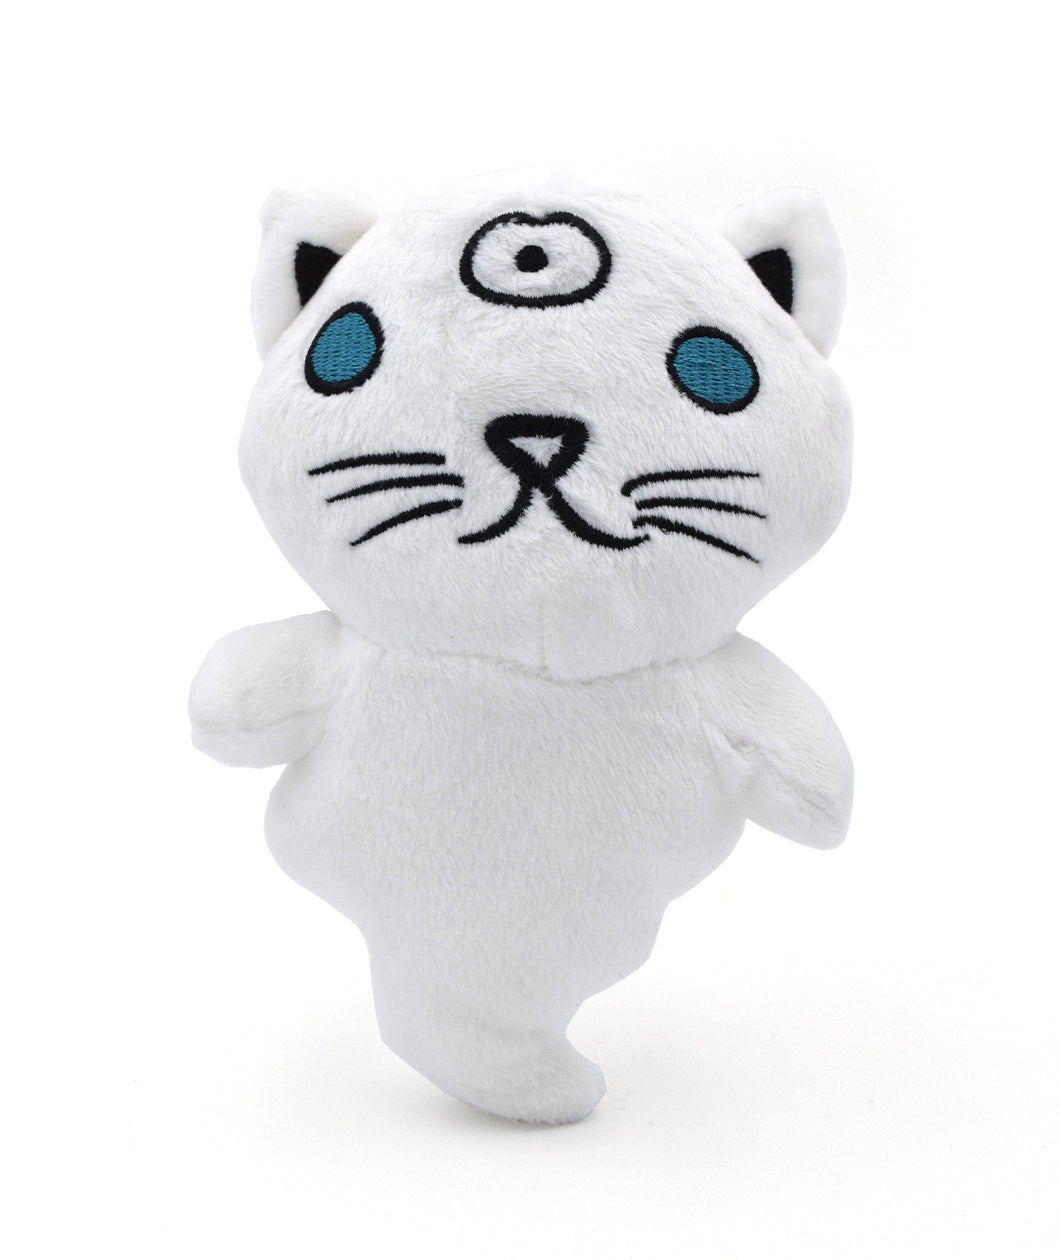 The Quantum Schrodinger's Cat which represents the uncertainty of not knowing. White 5.5" cat plush with ghost like lower body.